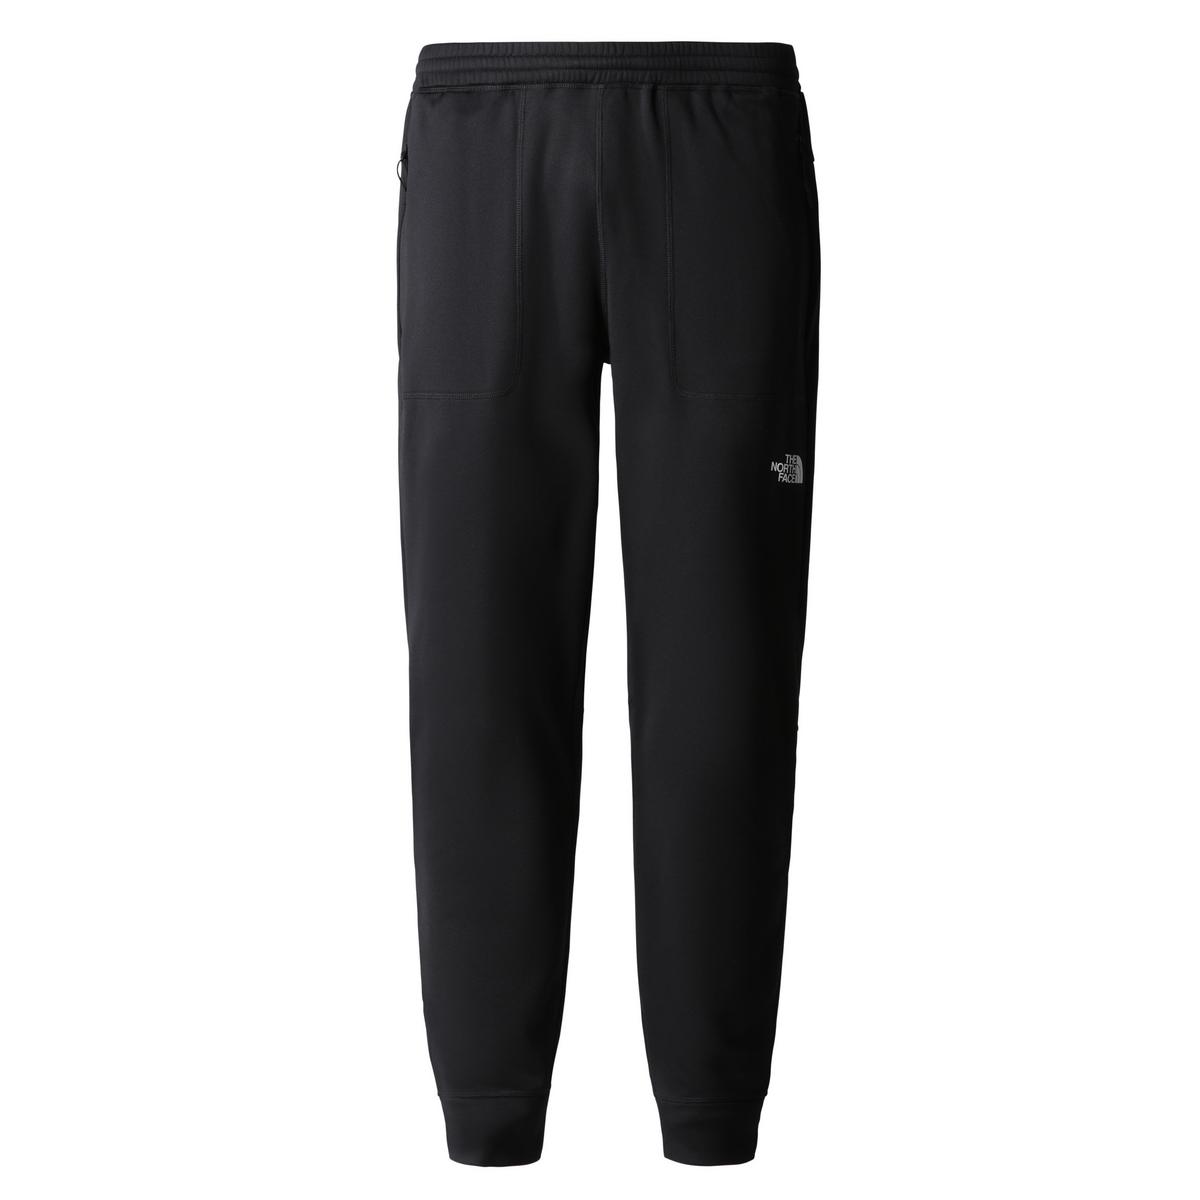 New Womens The North Face Canyonlands Athletic Pants Fleece Jogger  Sweatpants